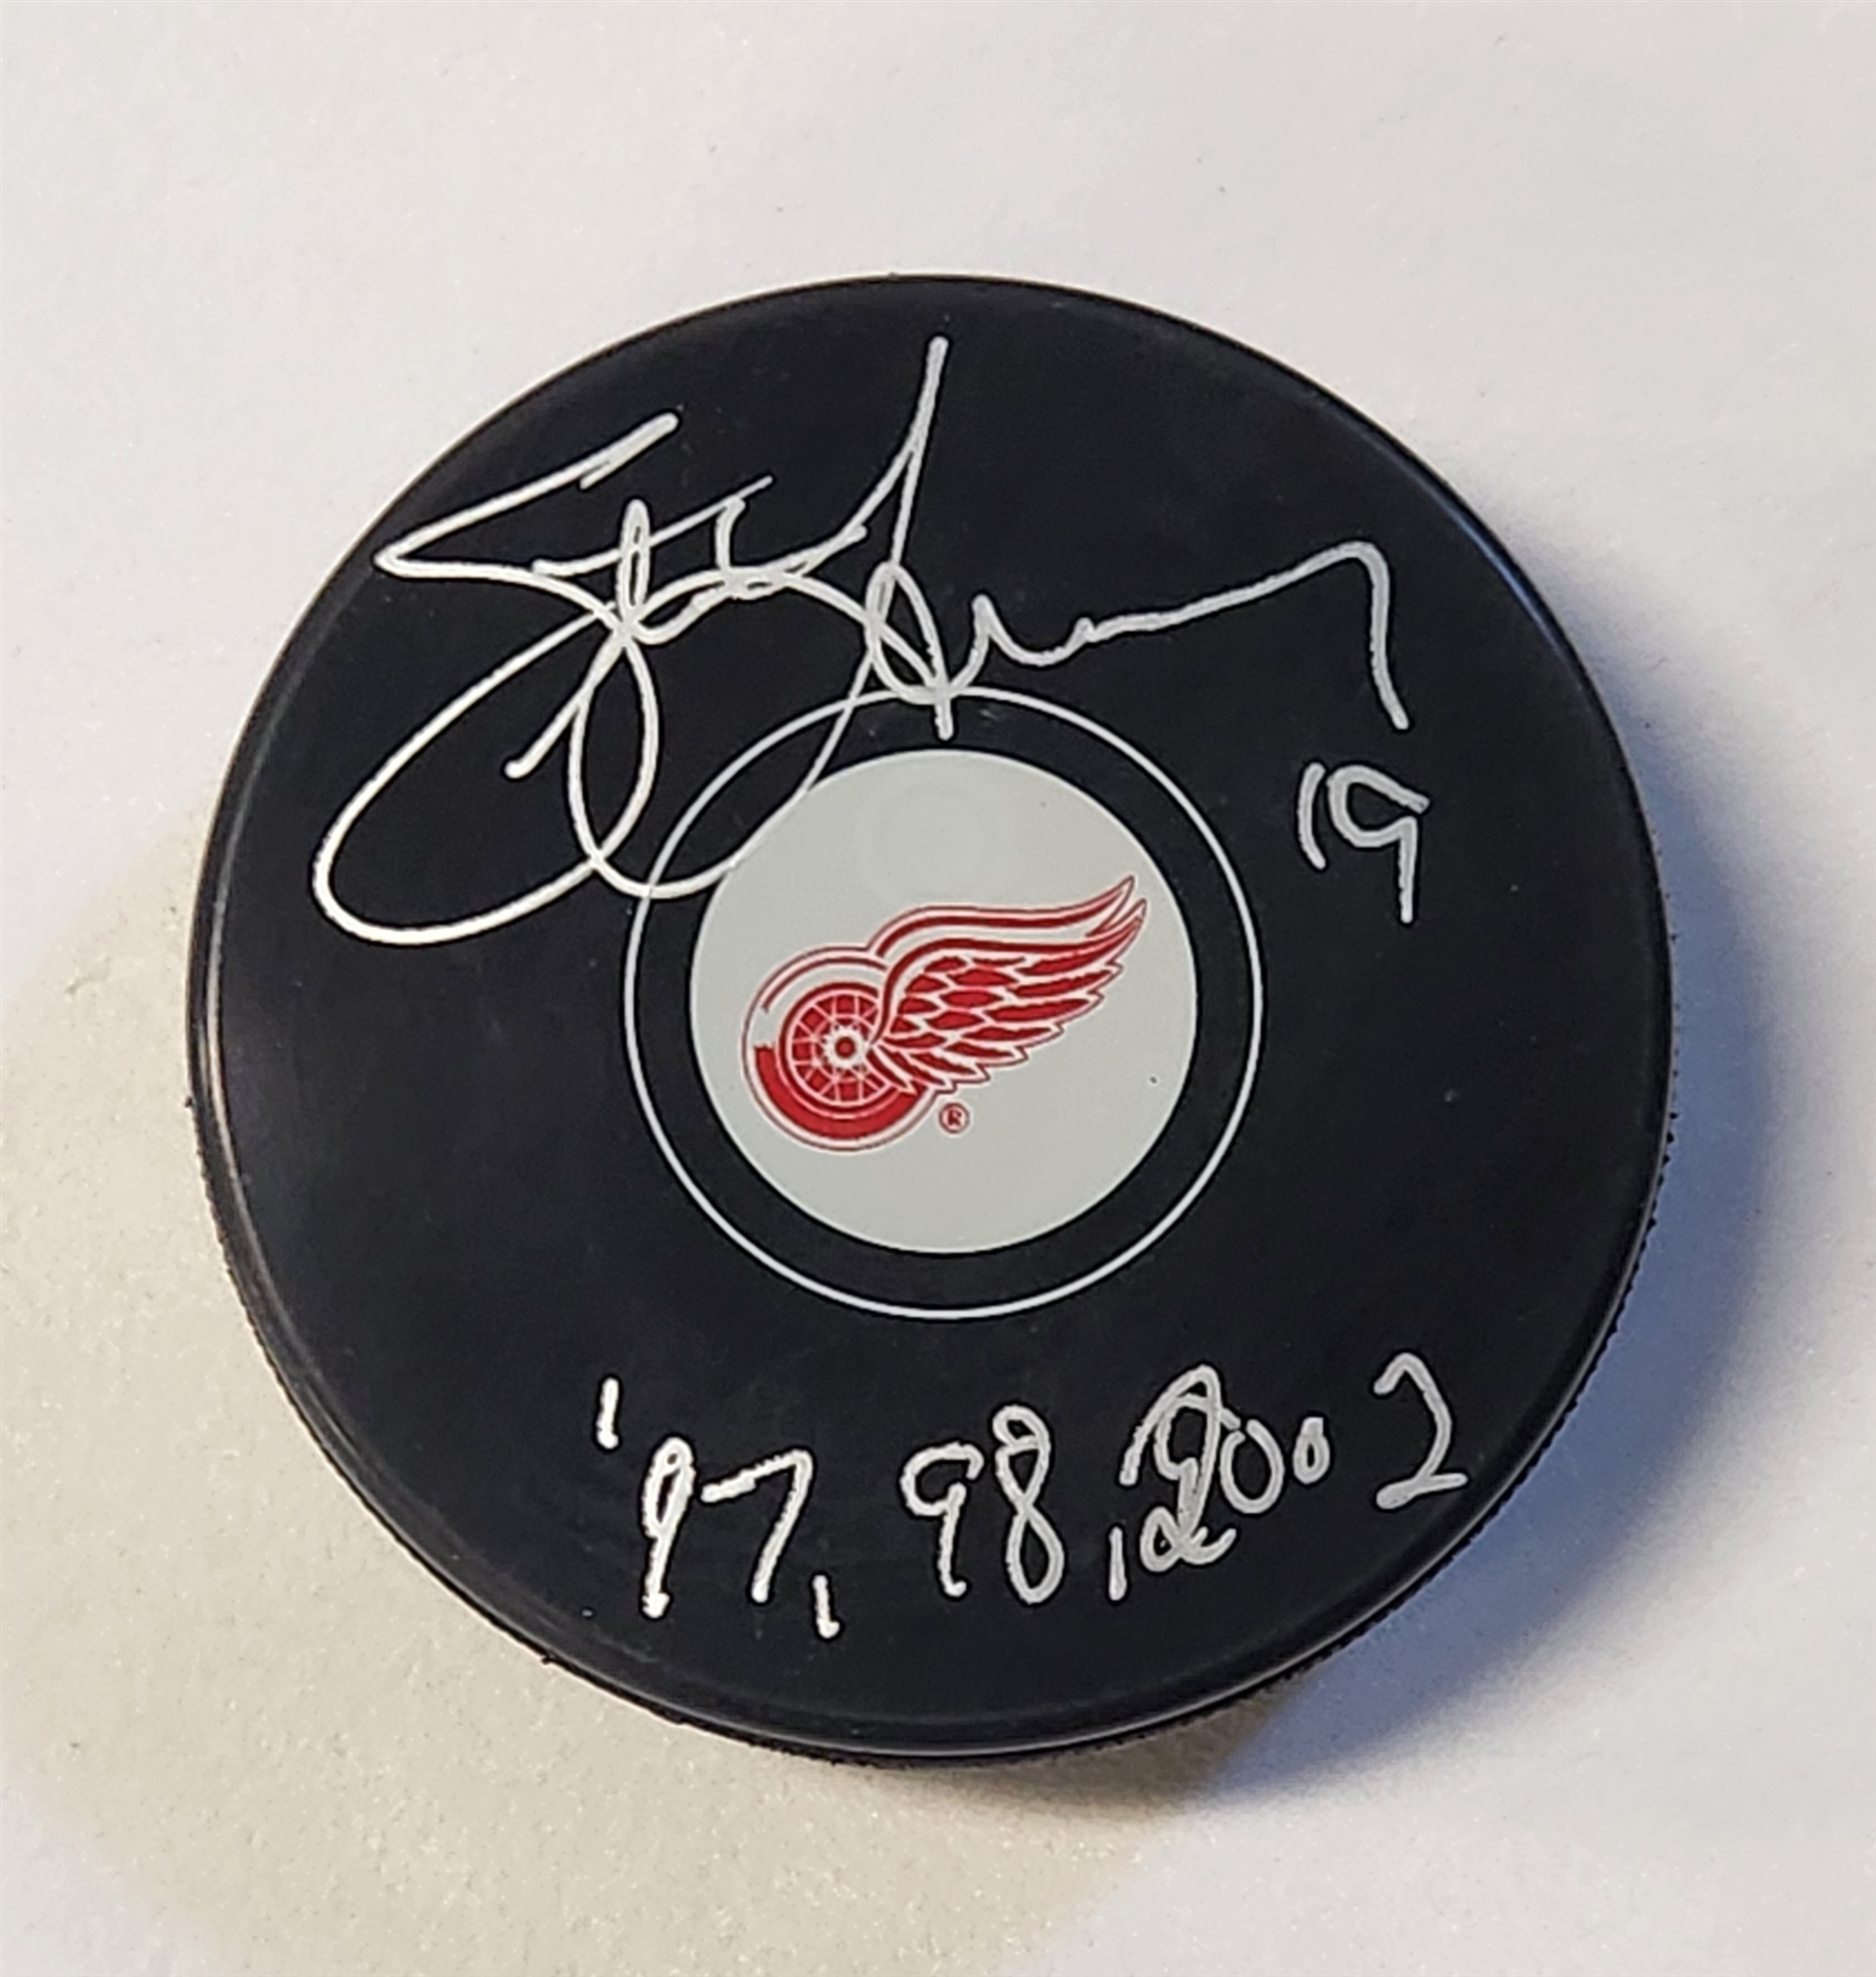 Steve Yzerman Autographed Detroit Red Wings Hockey Puck with Cup Notes (Flawed)